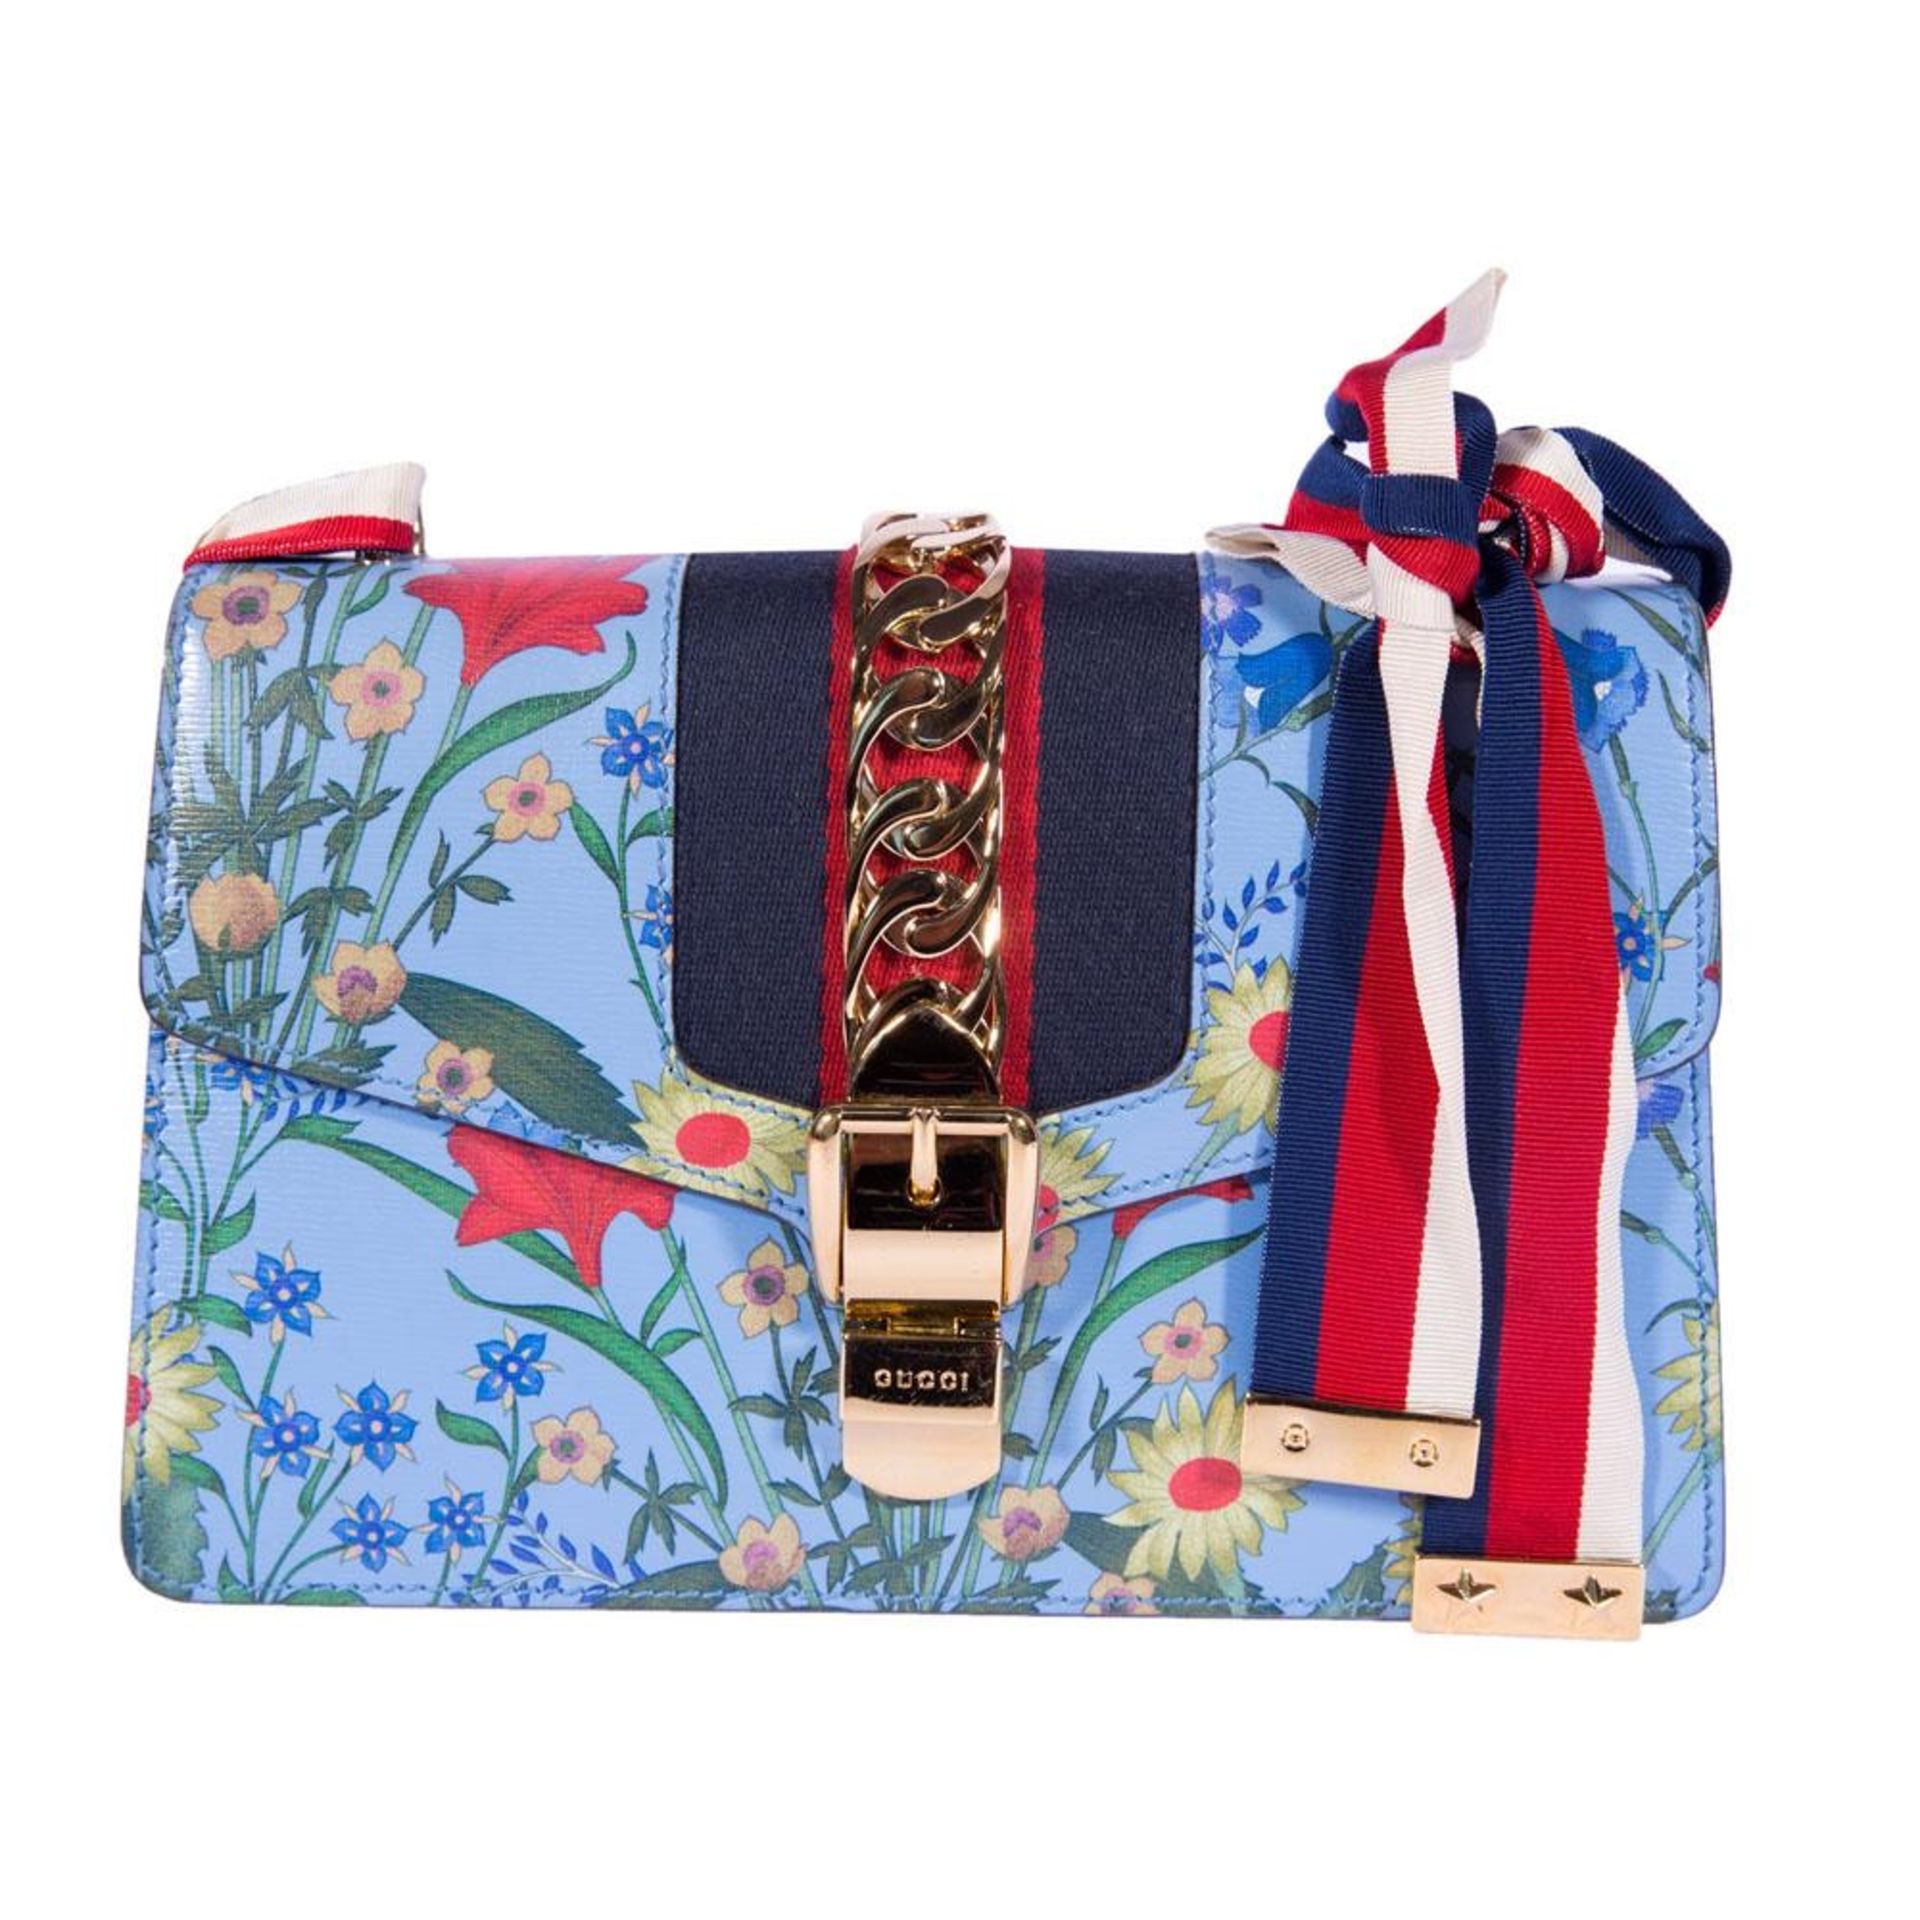 "Sylvie Flora" - Gucci bag, leather, blue, decorated with vegetal motifs and metallic appliqué